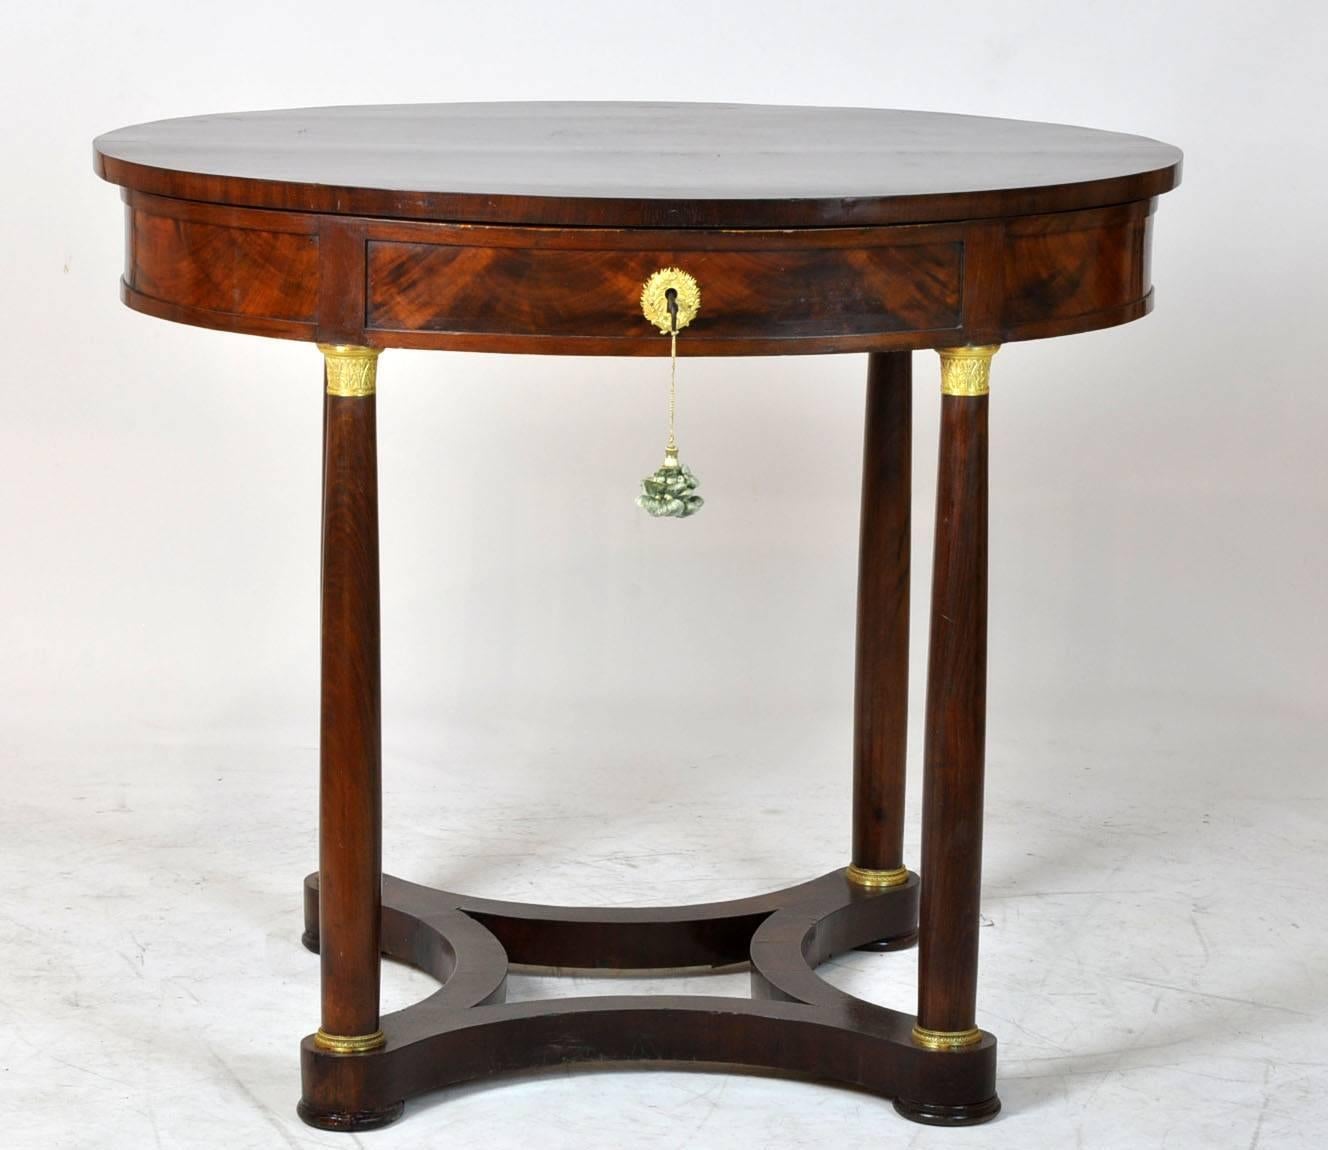 Great Austrian Empire dressing table. Mahogany with brass adornments. Four columns connections to a shaped base. Slip lid top revealing inside compartments. Unusual dressing table, 1840s. Great condition.